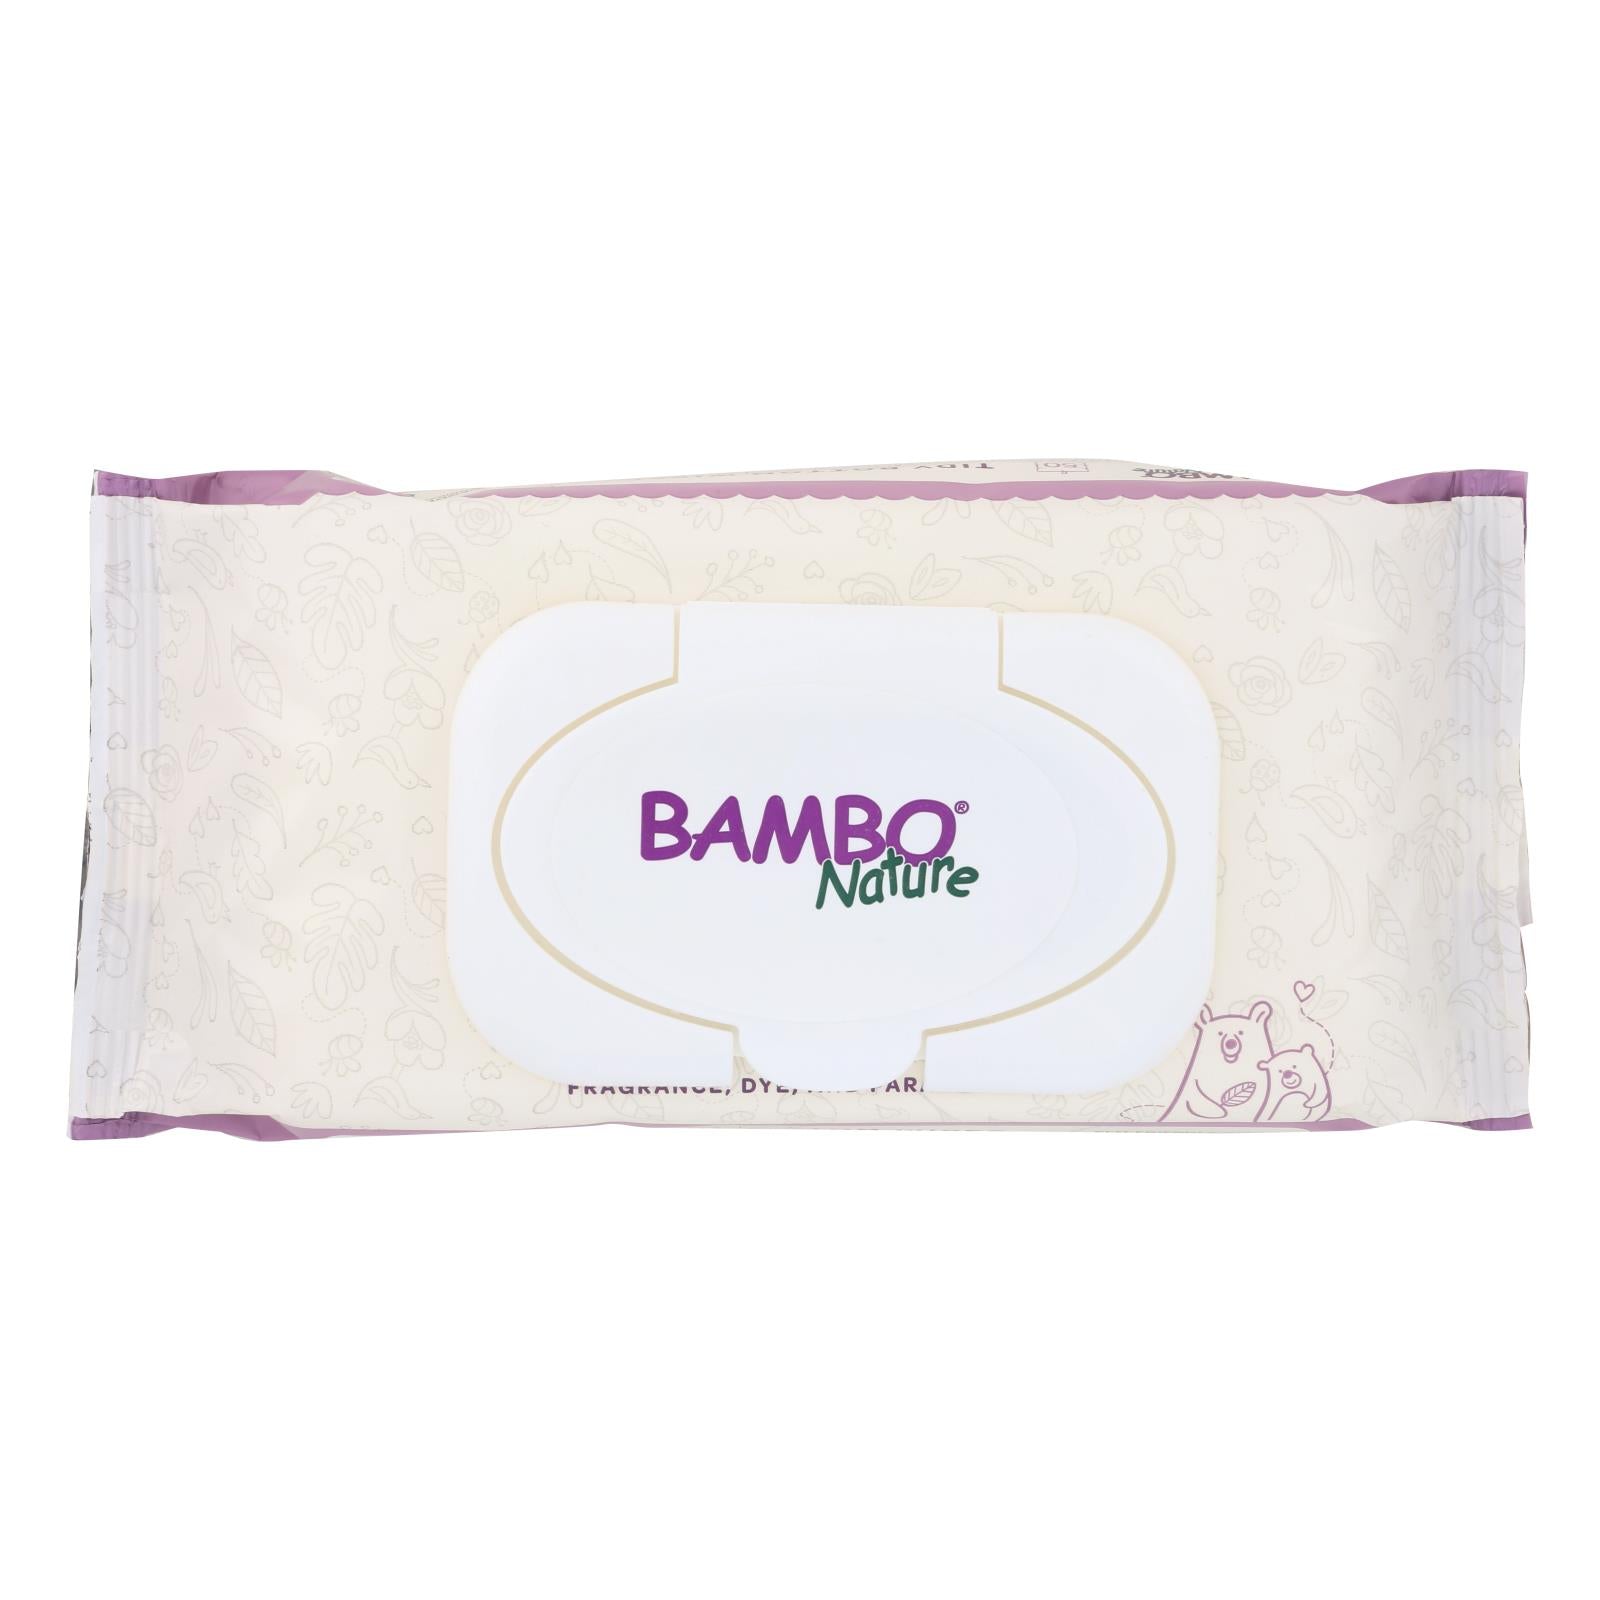 Bambo Nature, Bambo Nature - Wet Wipes Tidy Bottom - Case of 24 - 50 CT (Pack of 24)